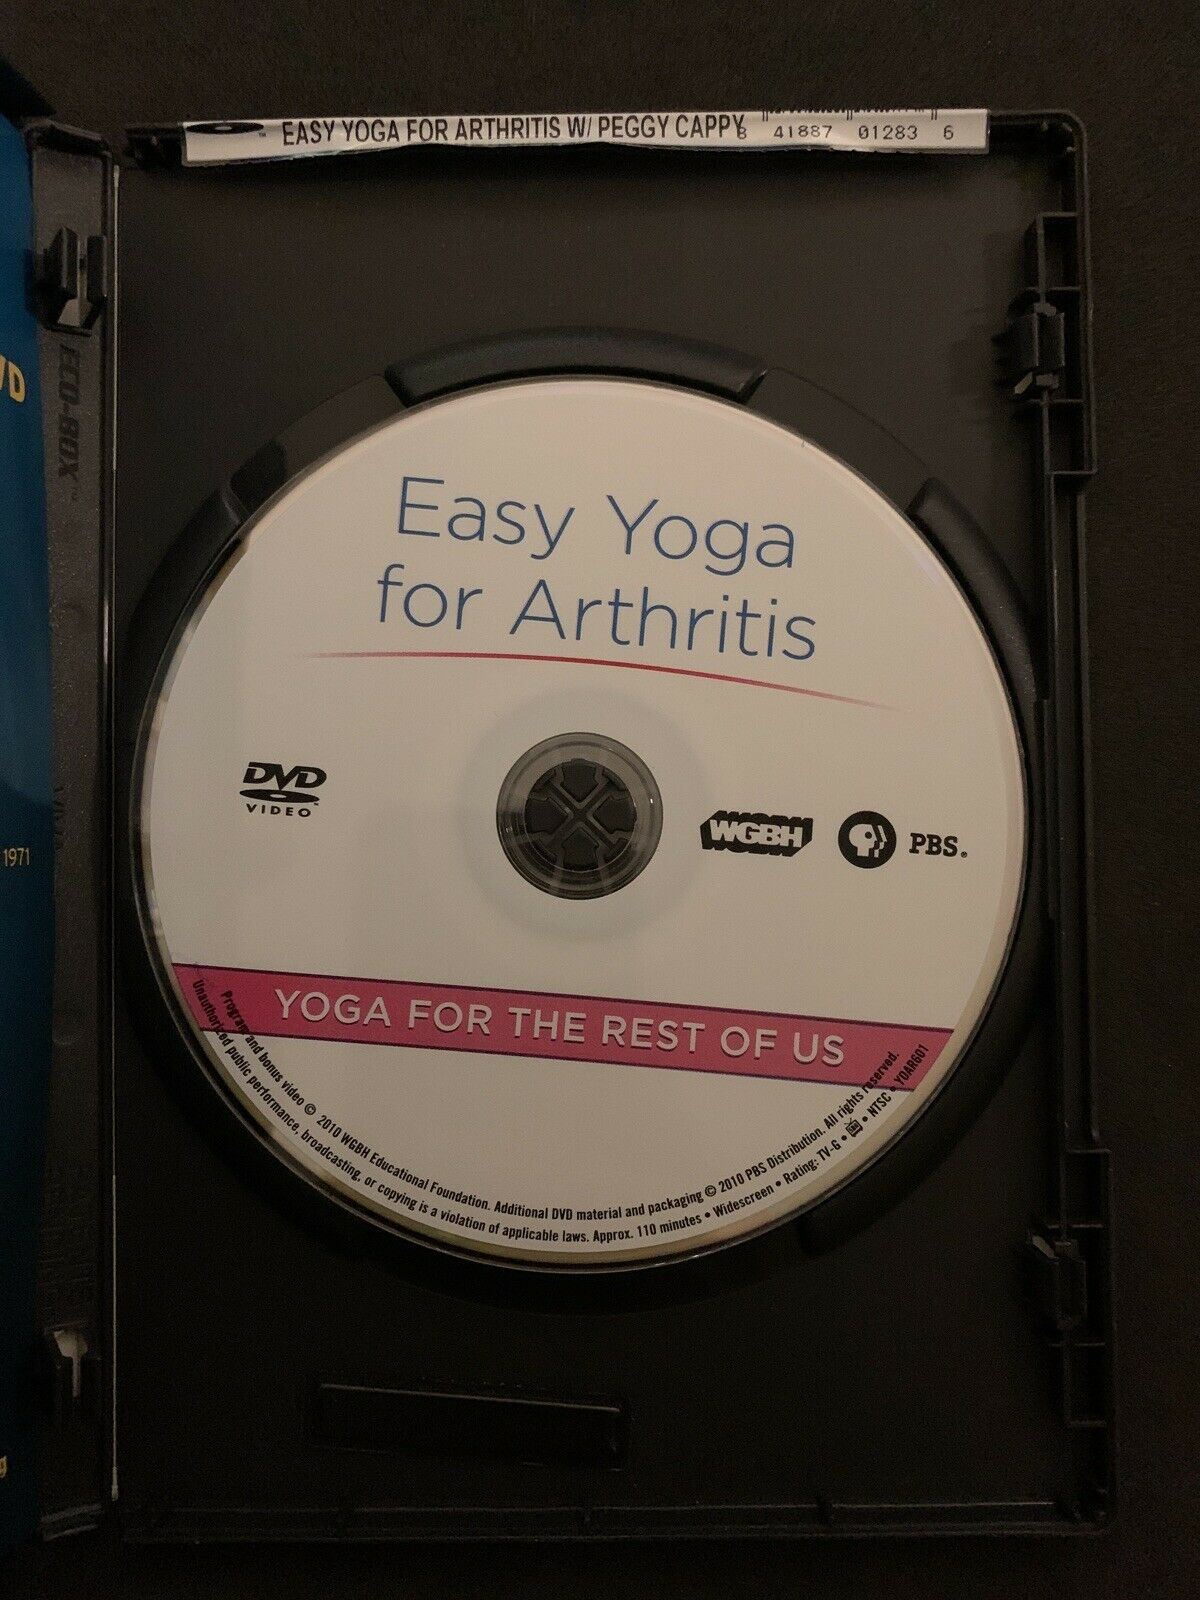 Yoga for the Rest of Us: Easy Yoga for Arthritis with Peggy Cappy DVD